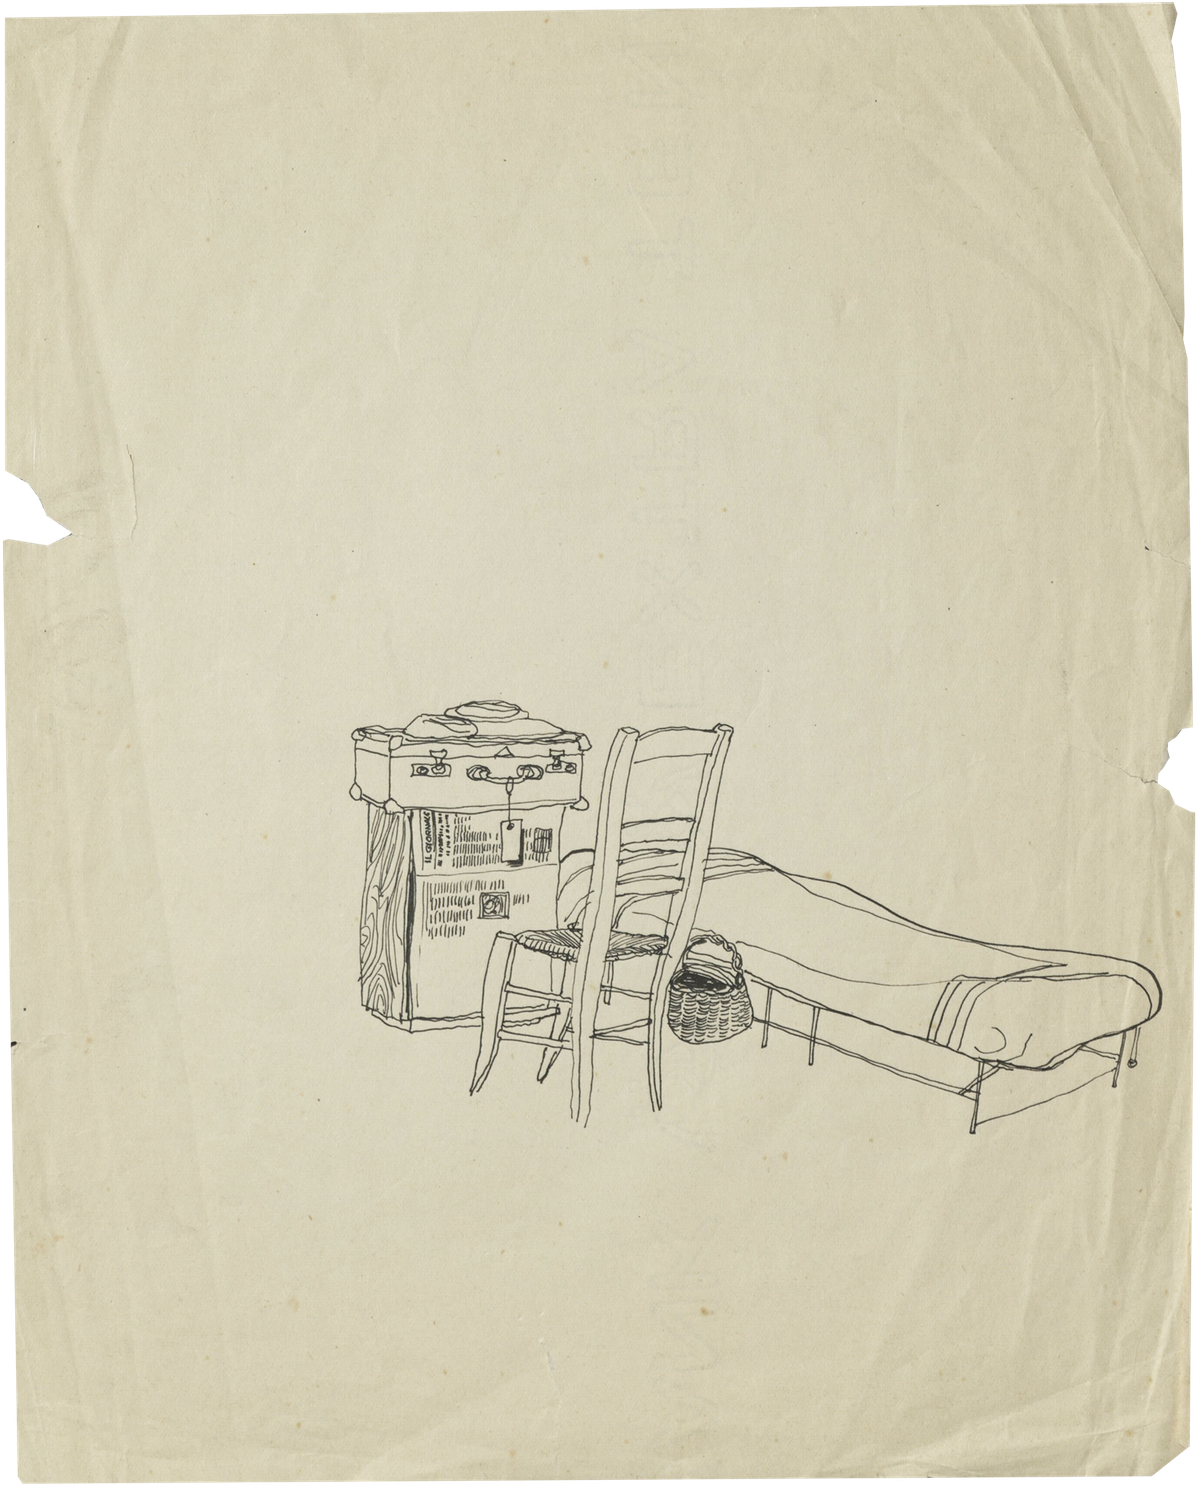 Drawing of a small bed, chair, and suitcase, 1941